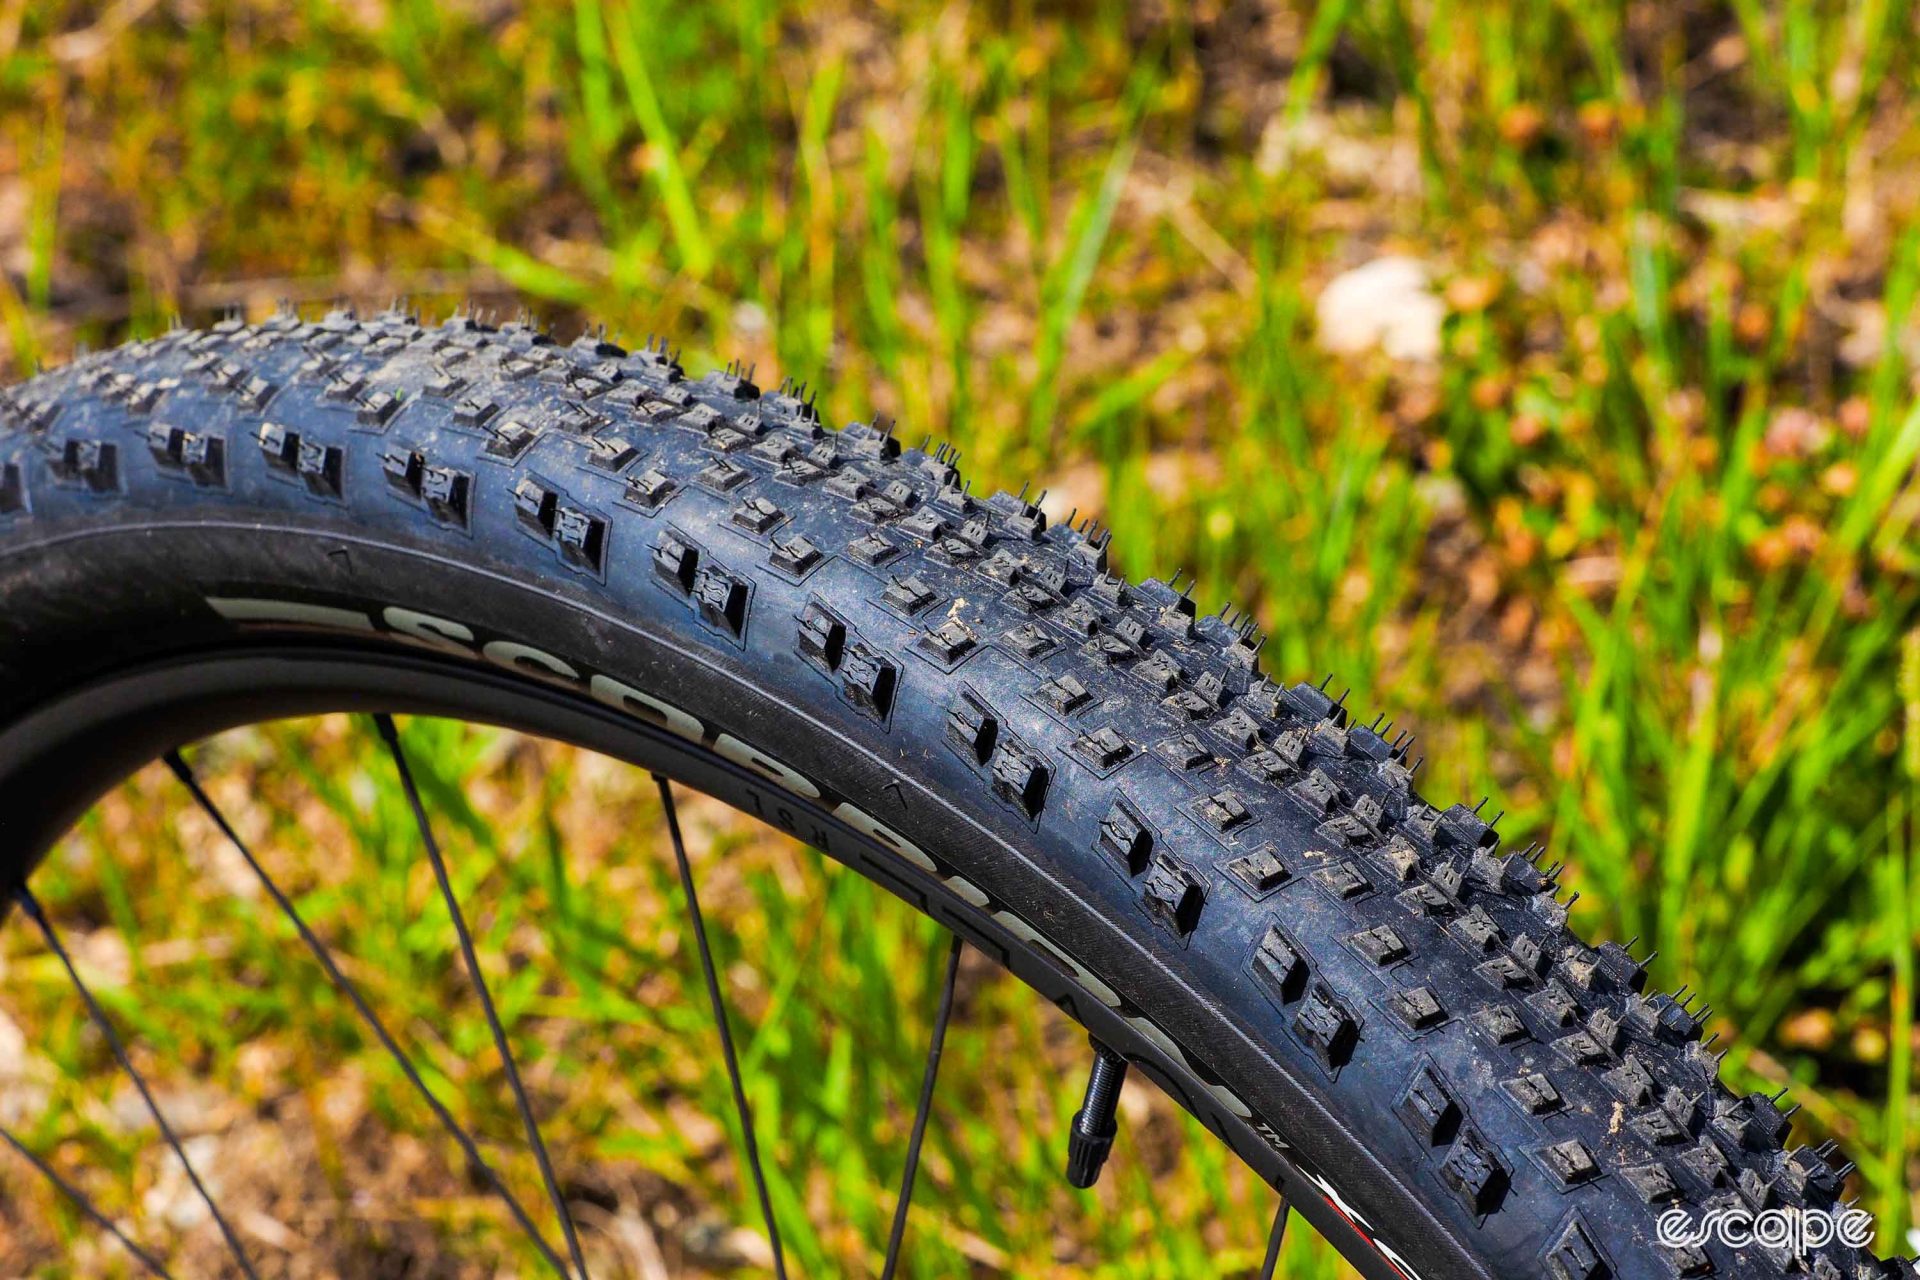 Pirelli's Scorpion XC RC tires feature a low center-height knob pattern with close spacing for fast rolling, along with taller, angled side knobs for cornering. These may or may not be final spec.